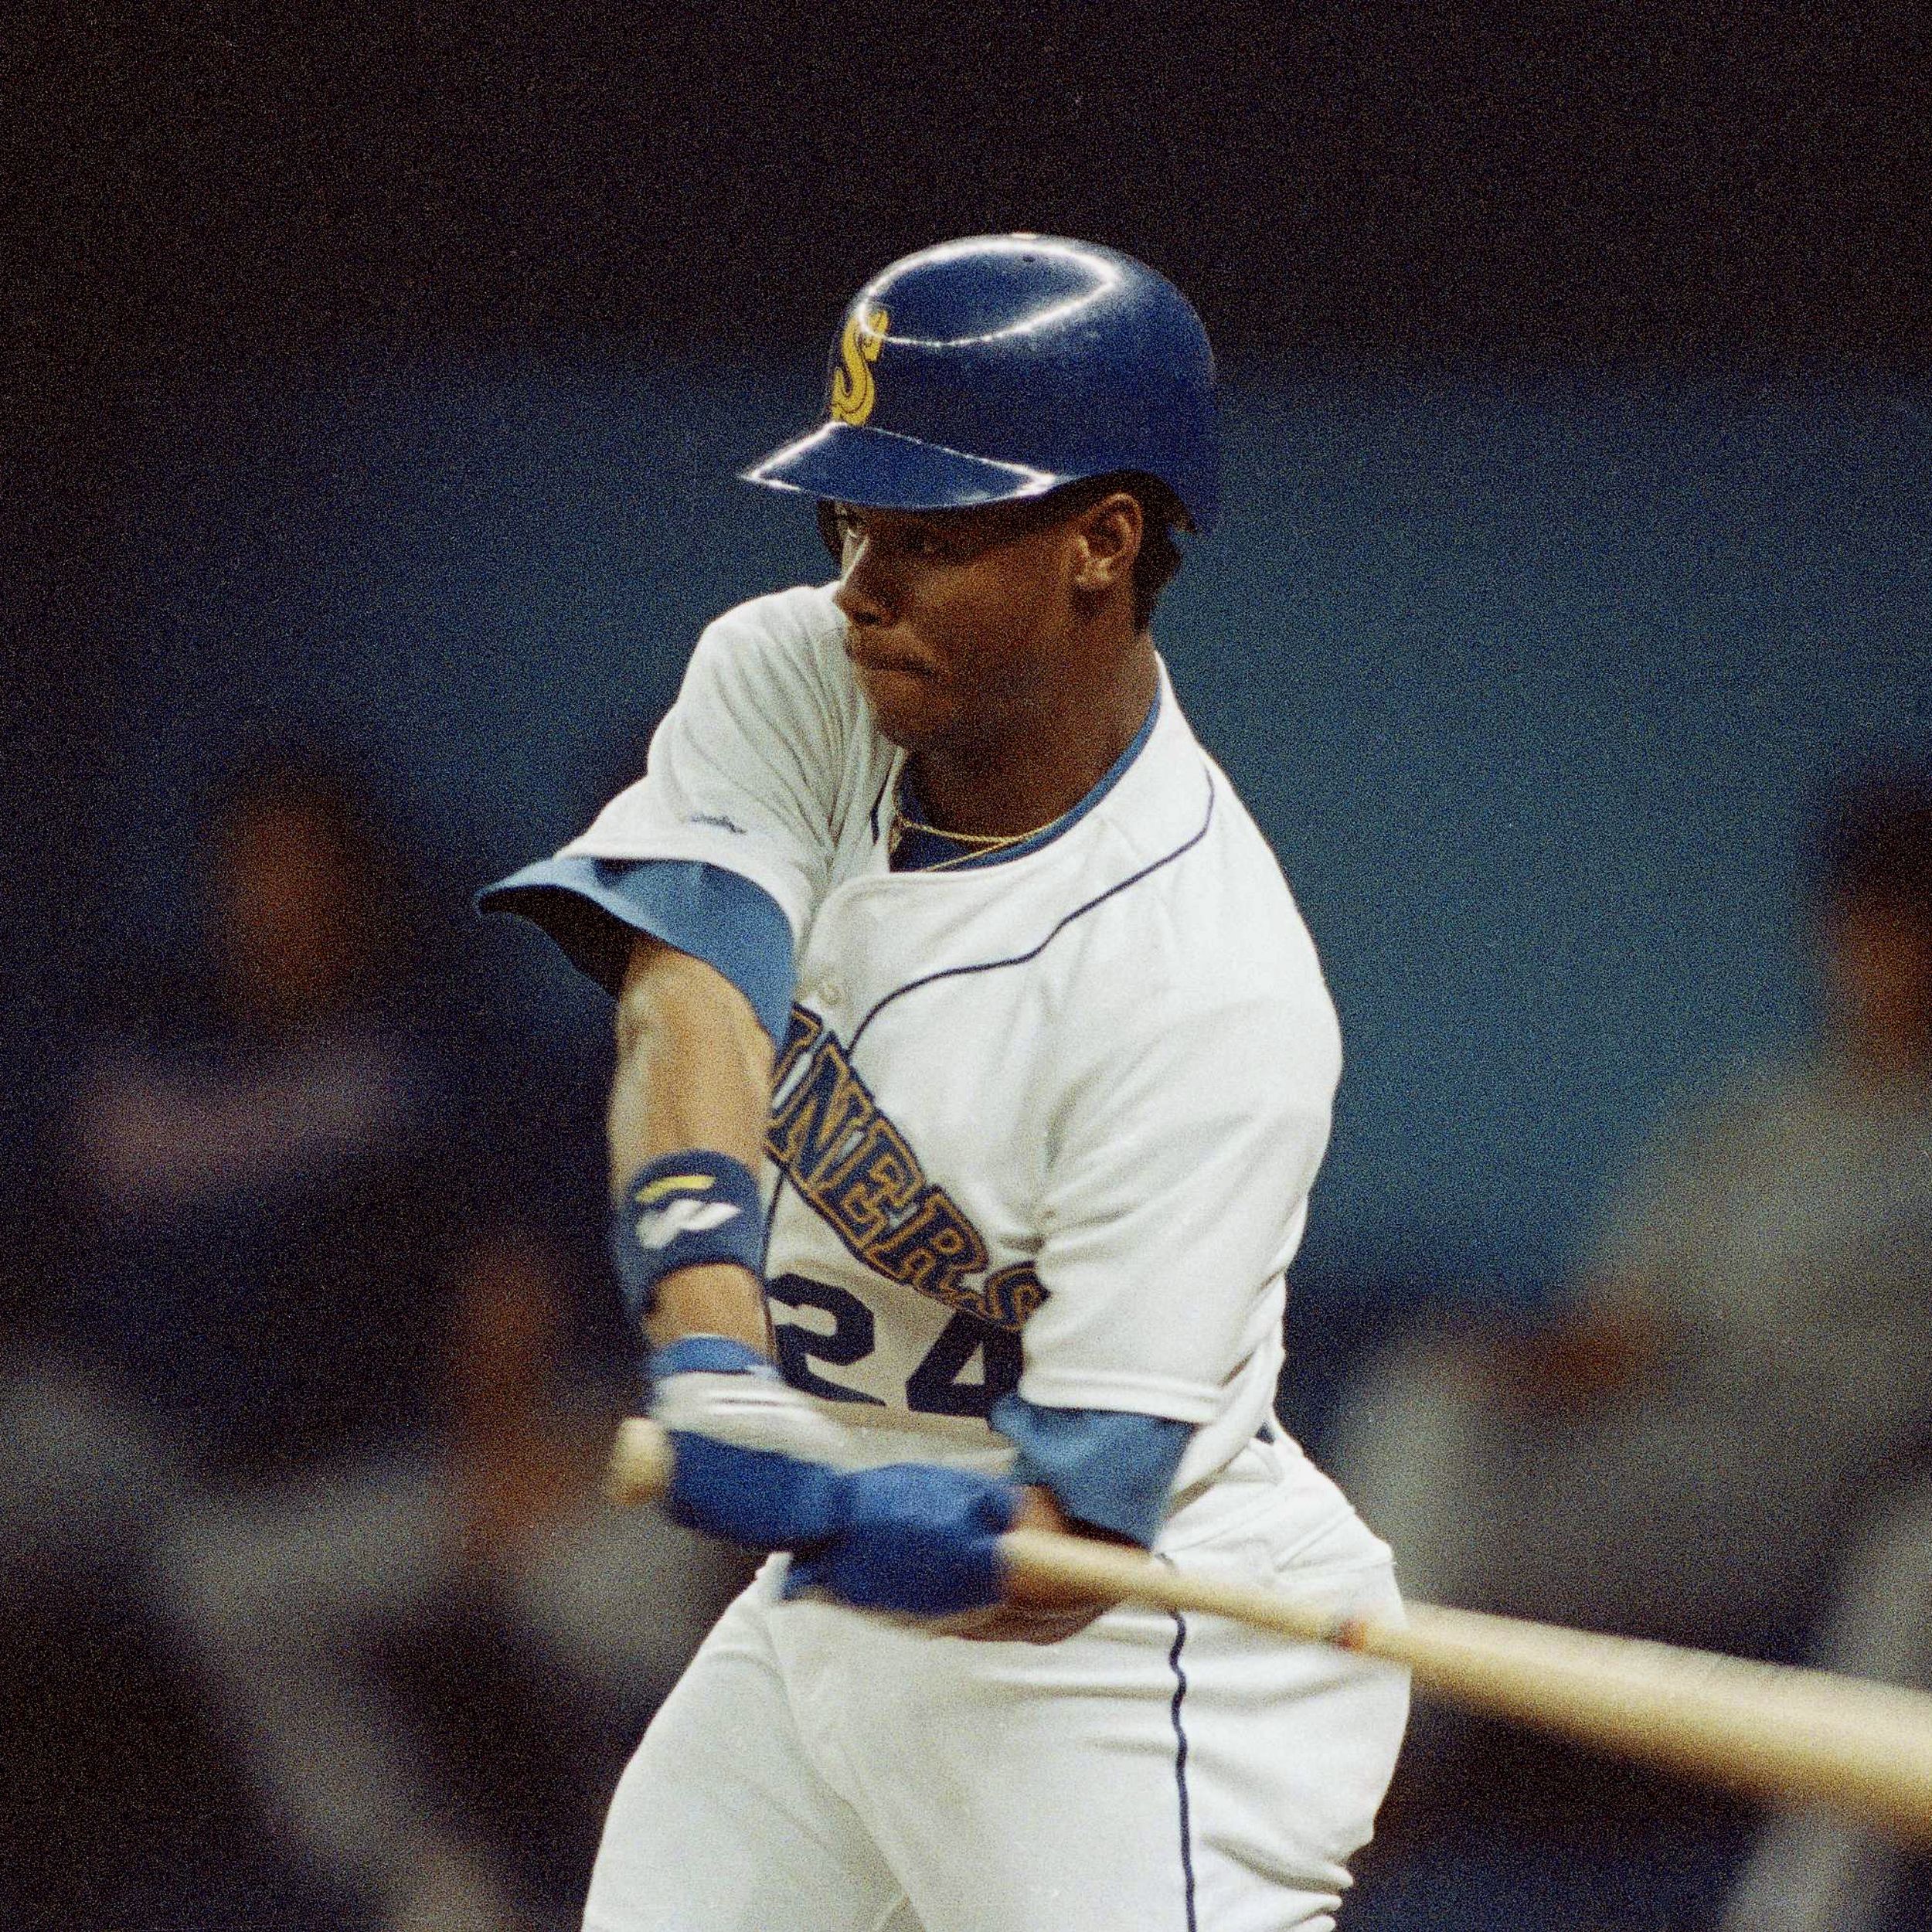 Seattle Mariners 1989 Team & Player Stats